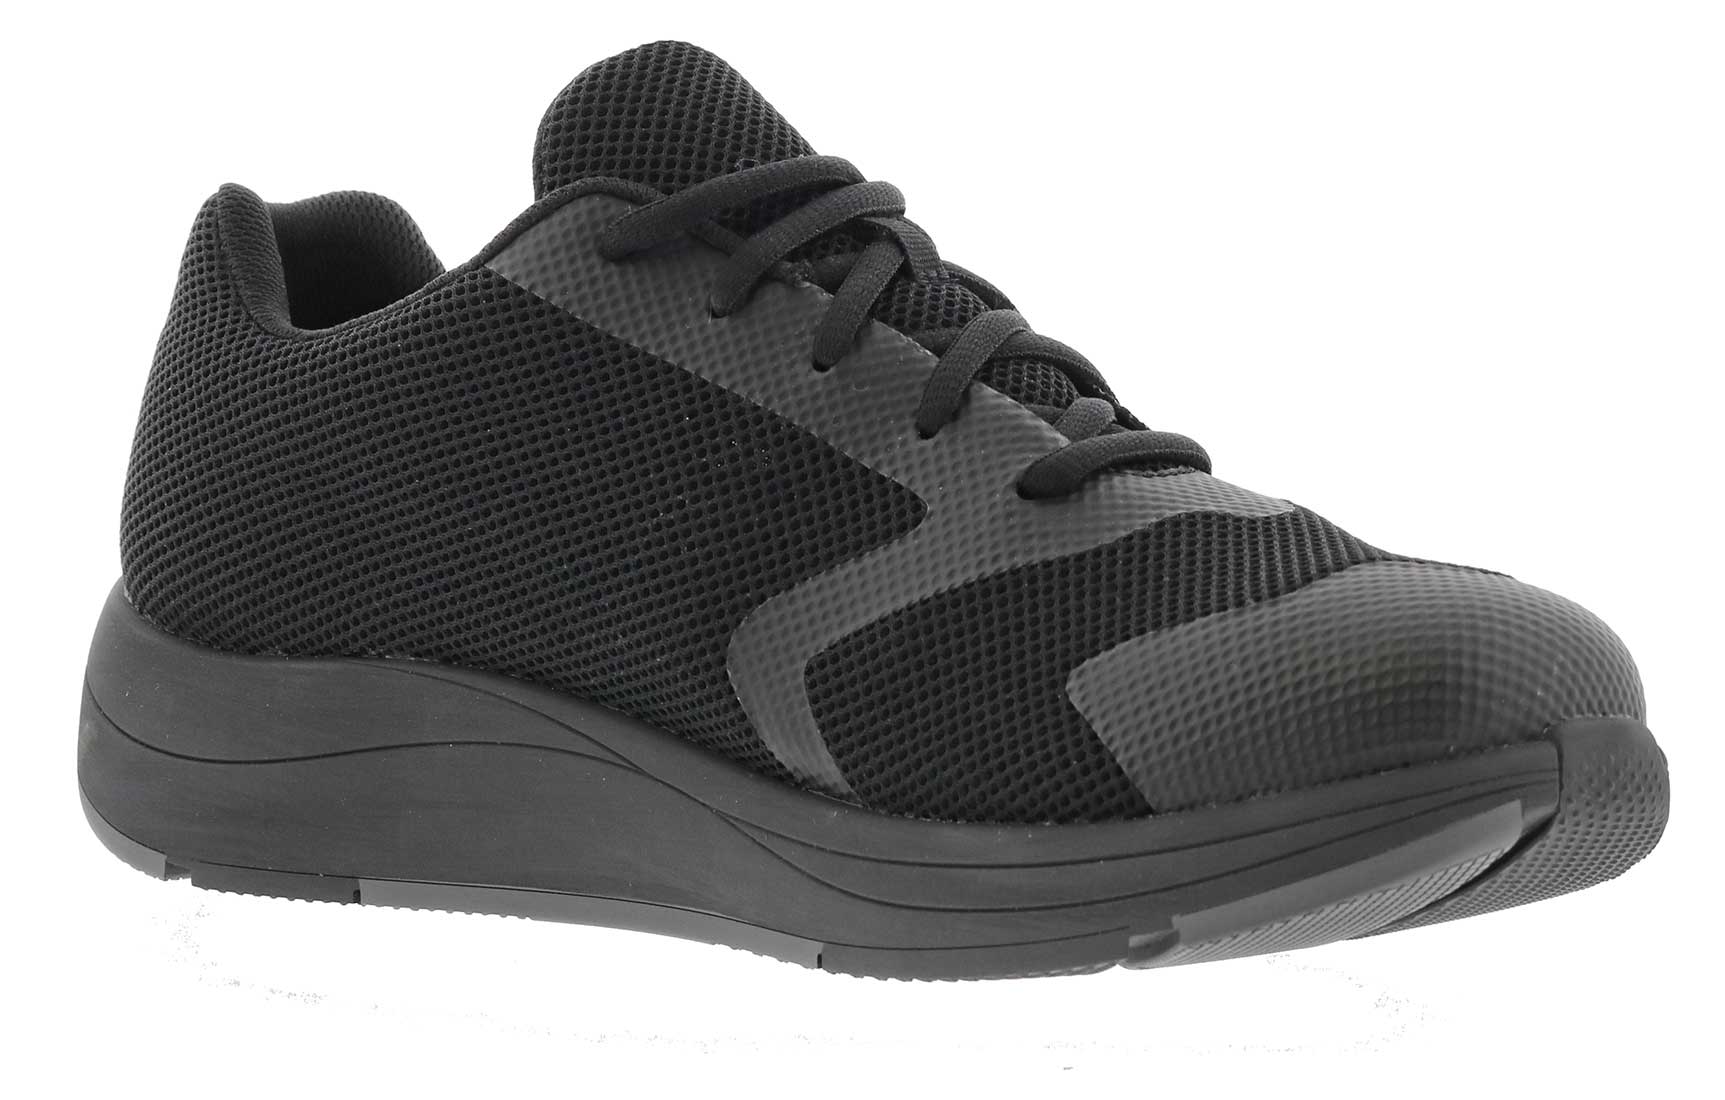 Drew Shoes Stable 40305 Men's Athletic Shoe - Casual Comfort Therapeutic Diabetic Shoe - Extra Depth For Orthotics